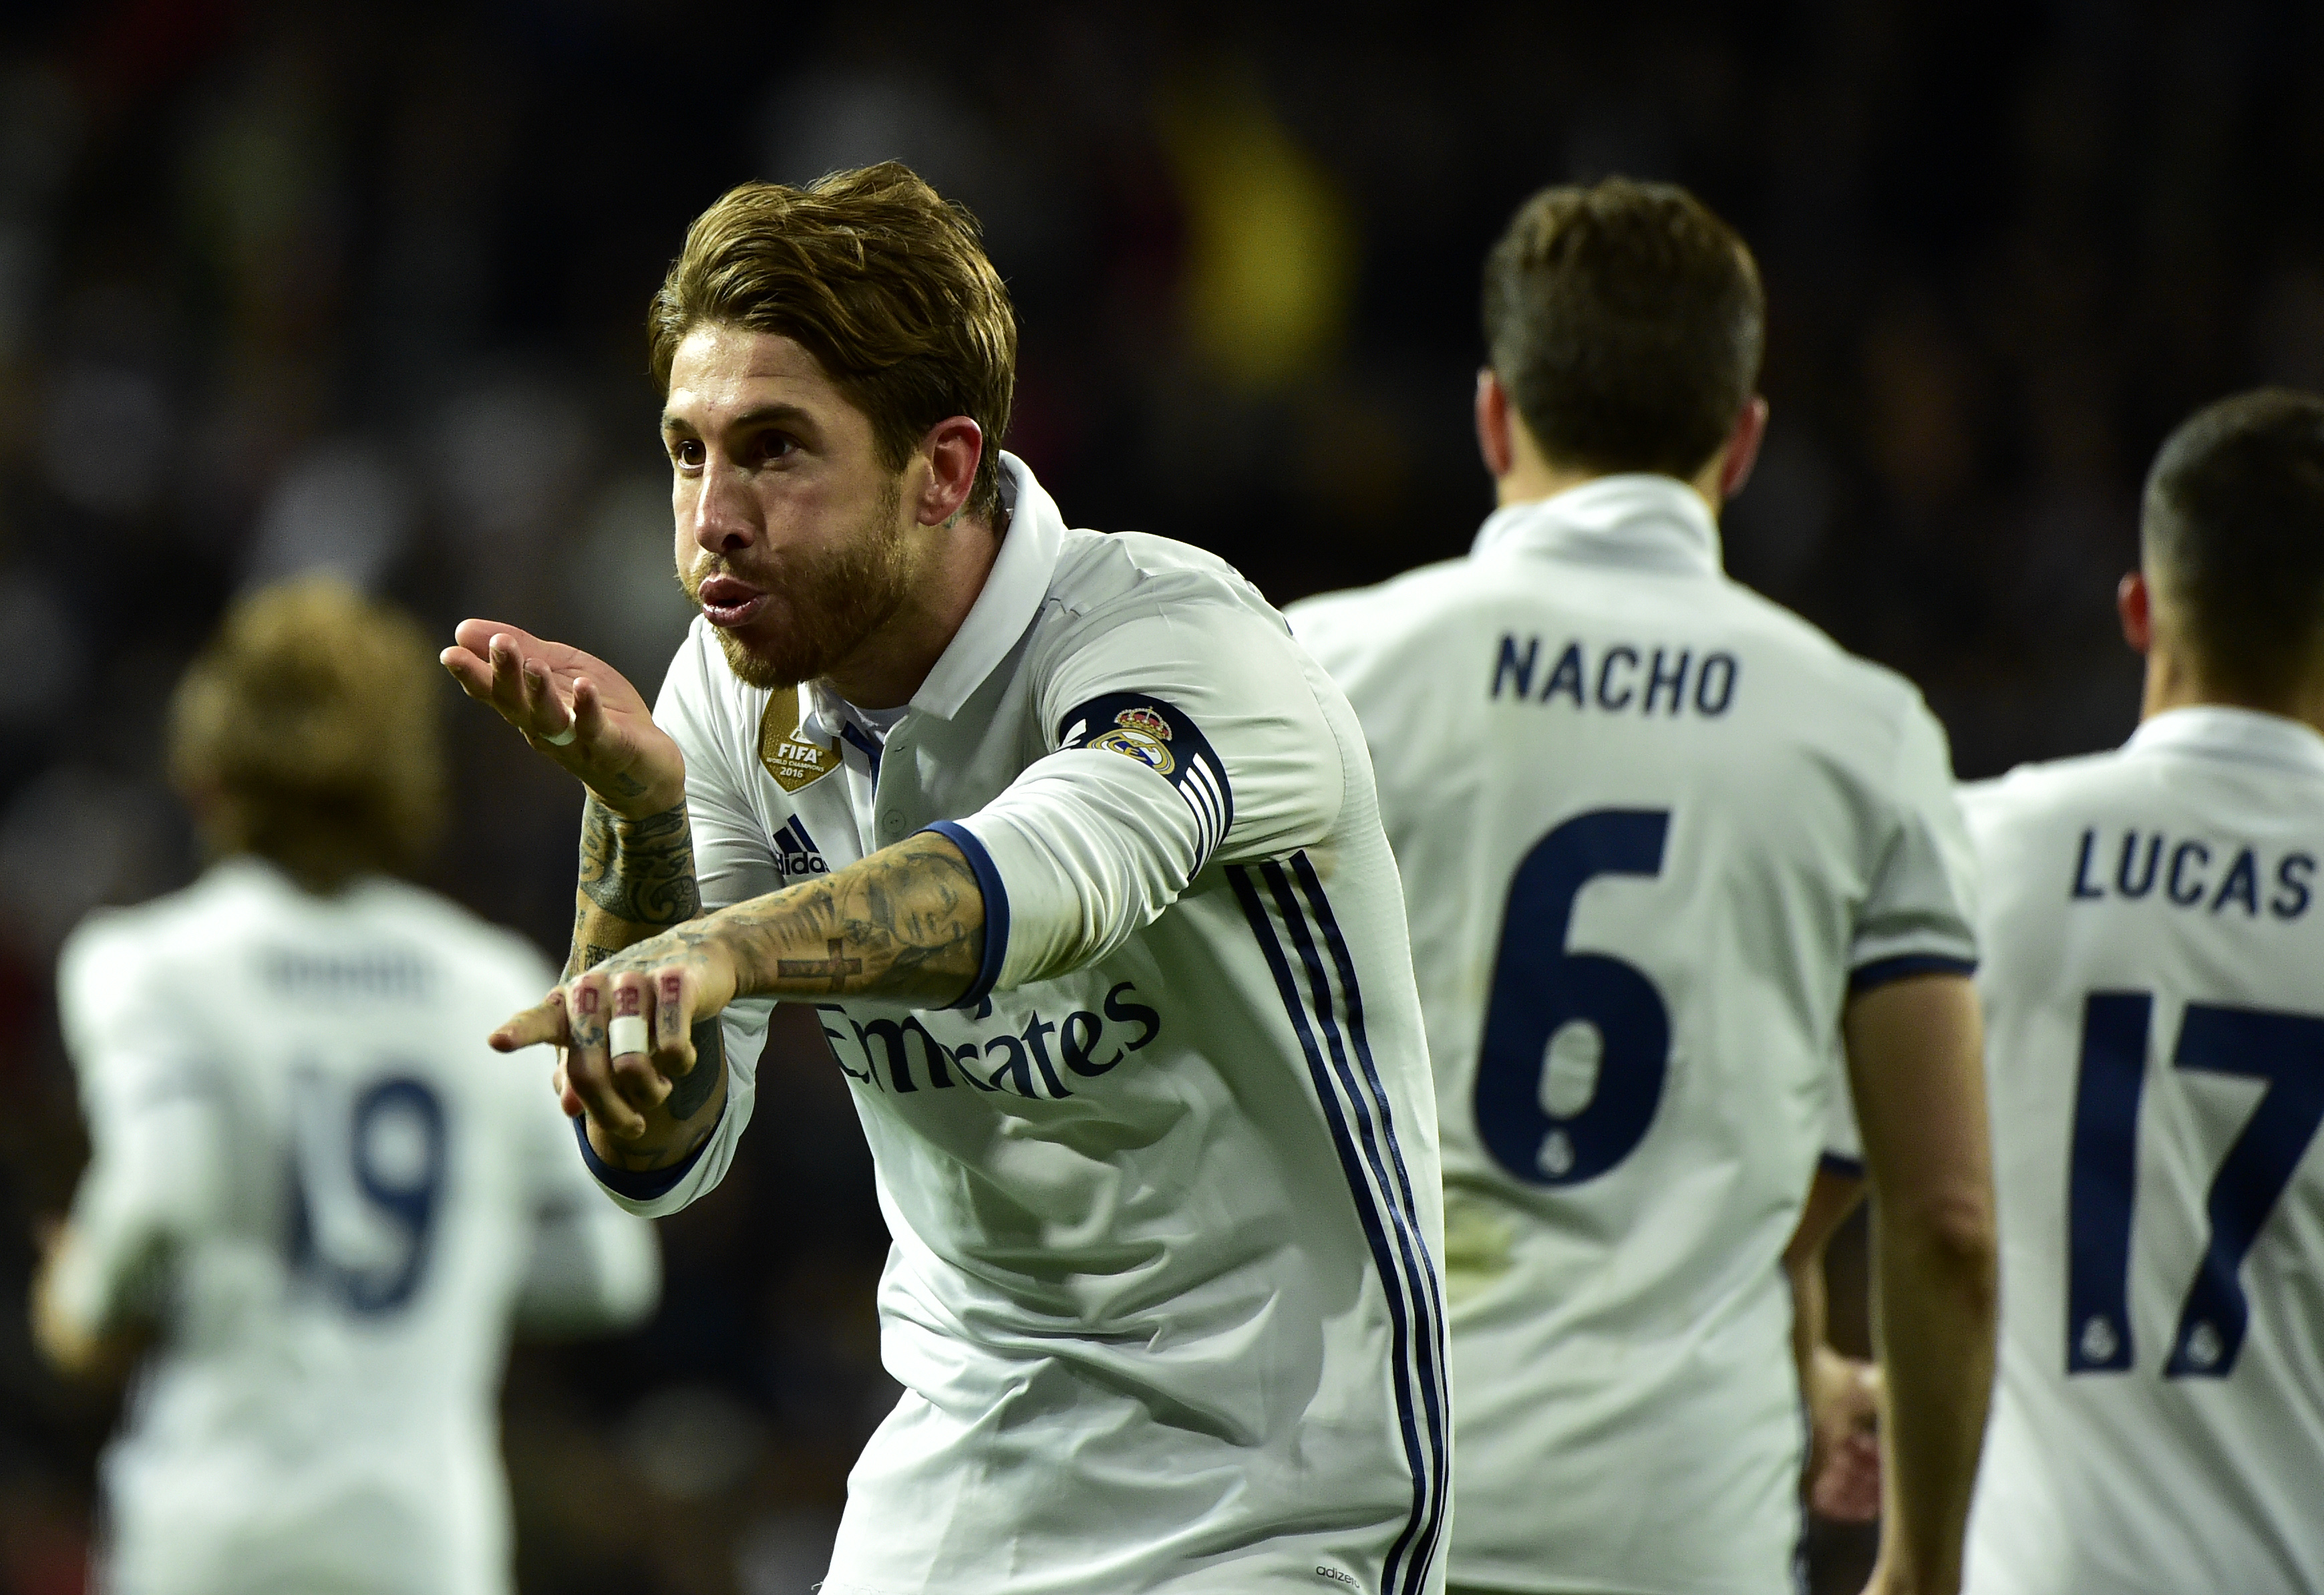 Real Madrid's defender Sergio Ramos celebrates after scoring a goal during the Spanish league footbal match Real Madrid CF vs Real Betis at the Santiago Bernabeu stadium in Madrid on March 12, 2017. / AFP PHOTO / GERARD JULIEN        (Photo credit should read GERARD JULIEN/AFP/Getty Images)